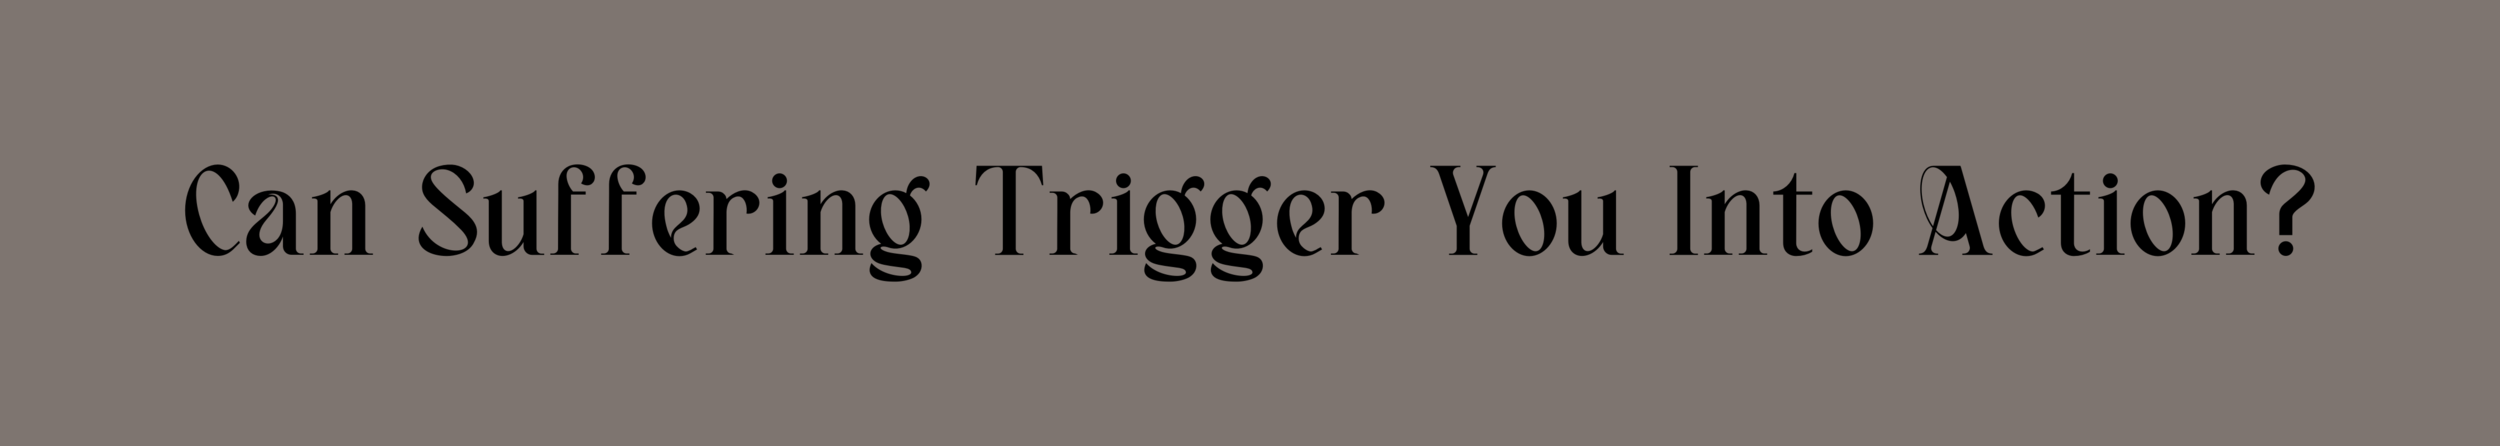 What Pain Is Triggering You Into Action (1).png